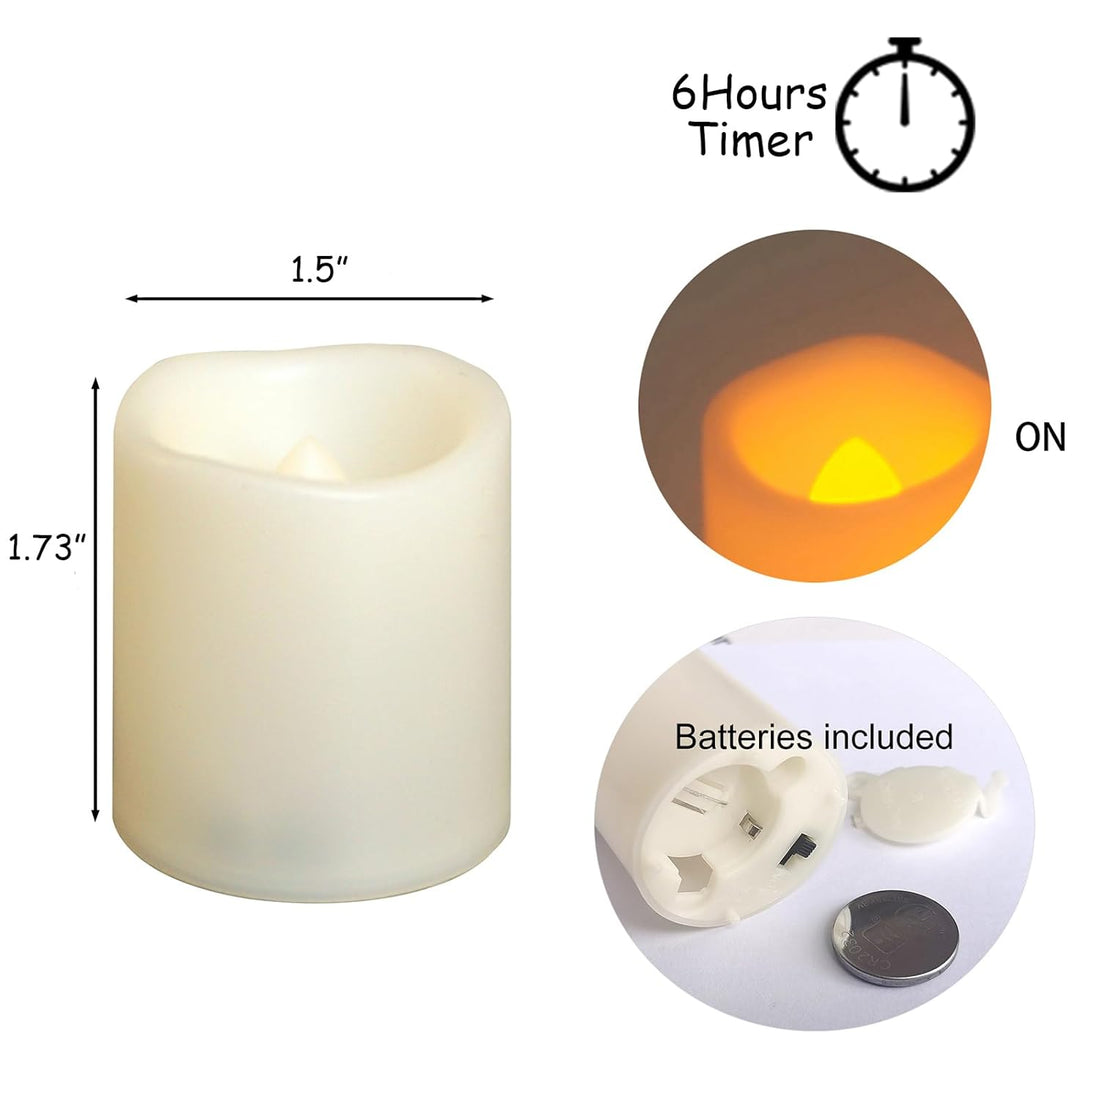 Qi8Li 24 Pack Votive Candles Battery Operated with 6H Timer, 200+ Hours Flickering Flameless Candles, Fake LED Electric Candles for Table Decoration for Christmas, 1.5" D X 1.73" H